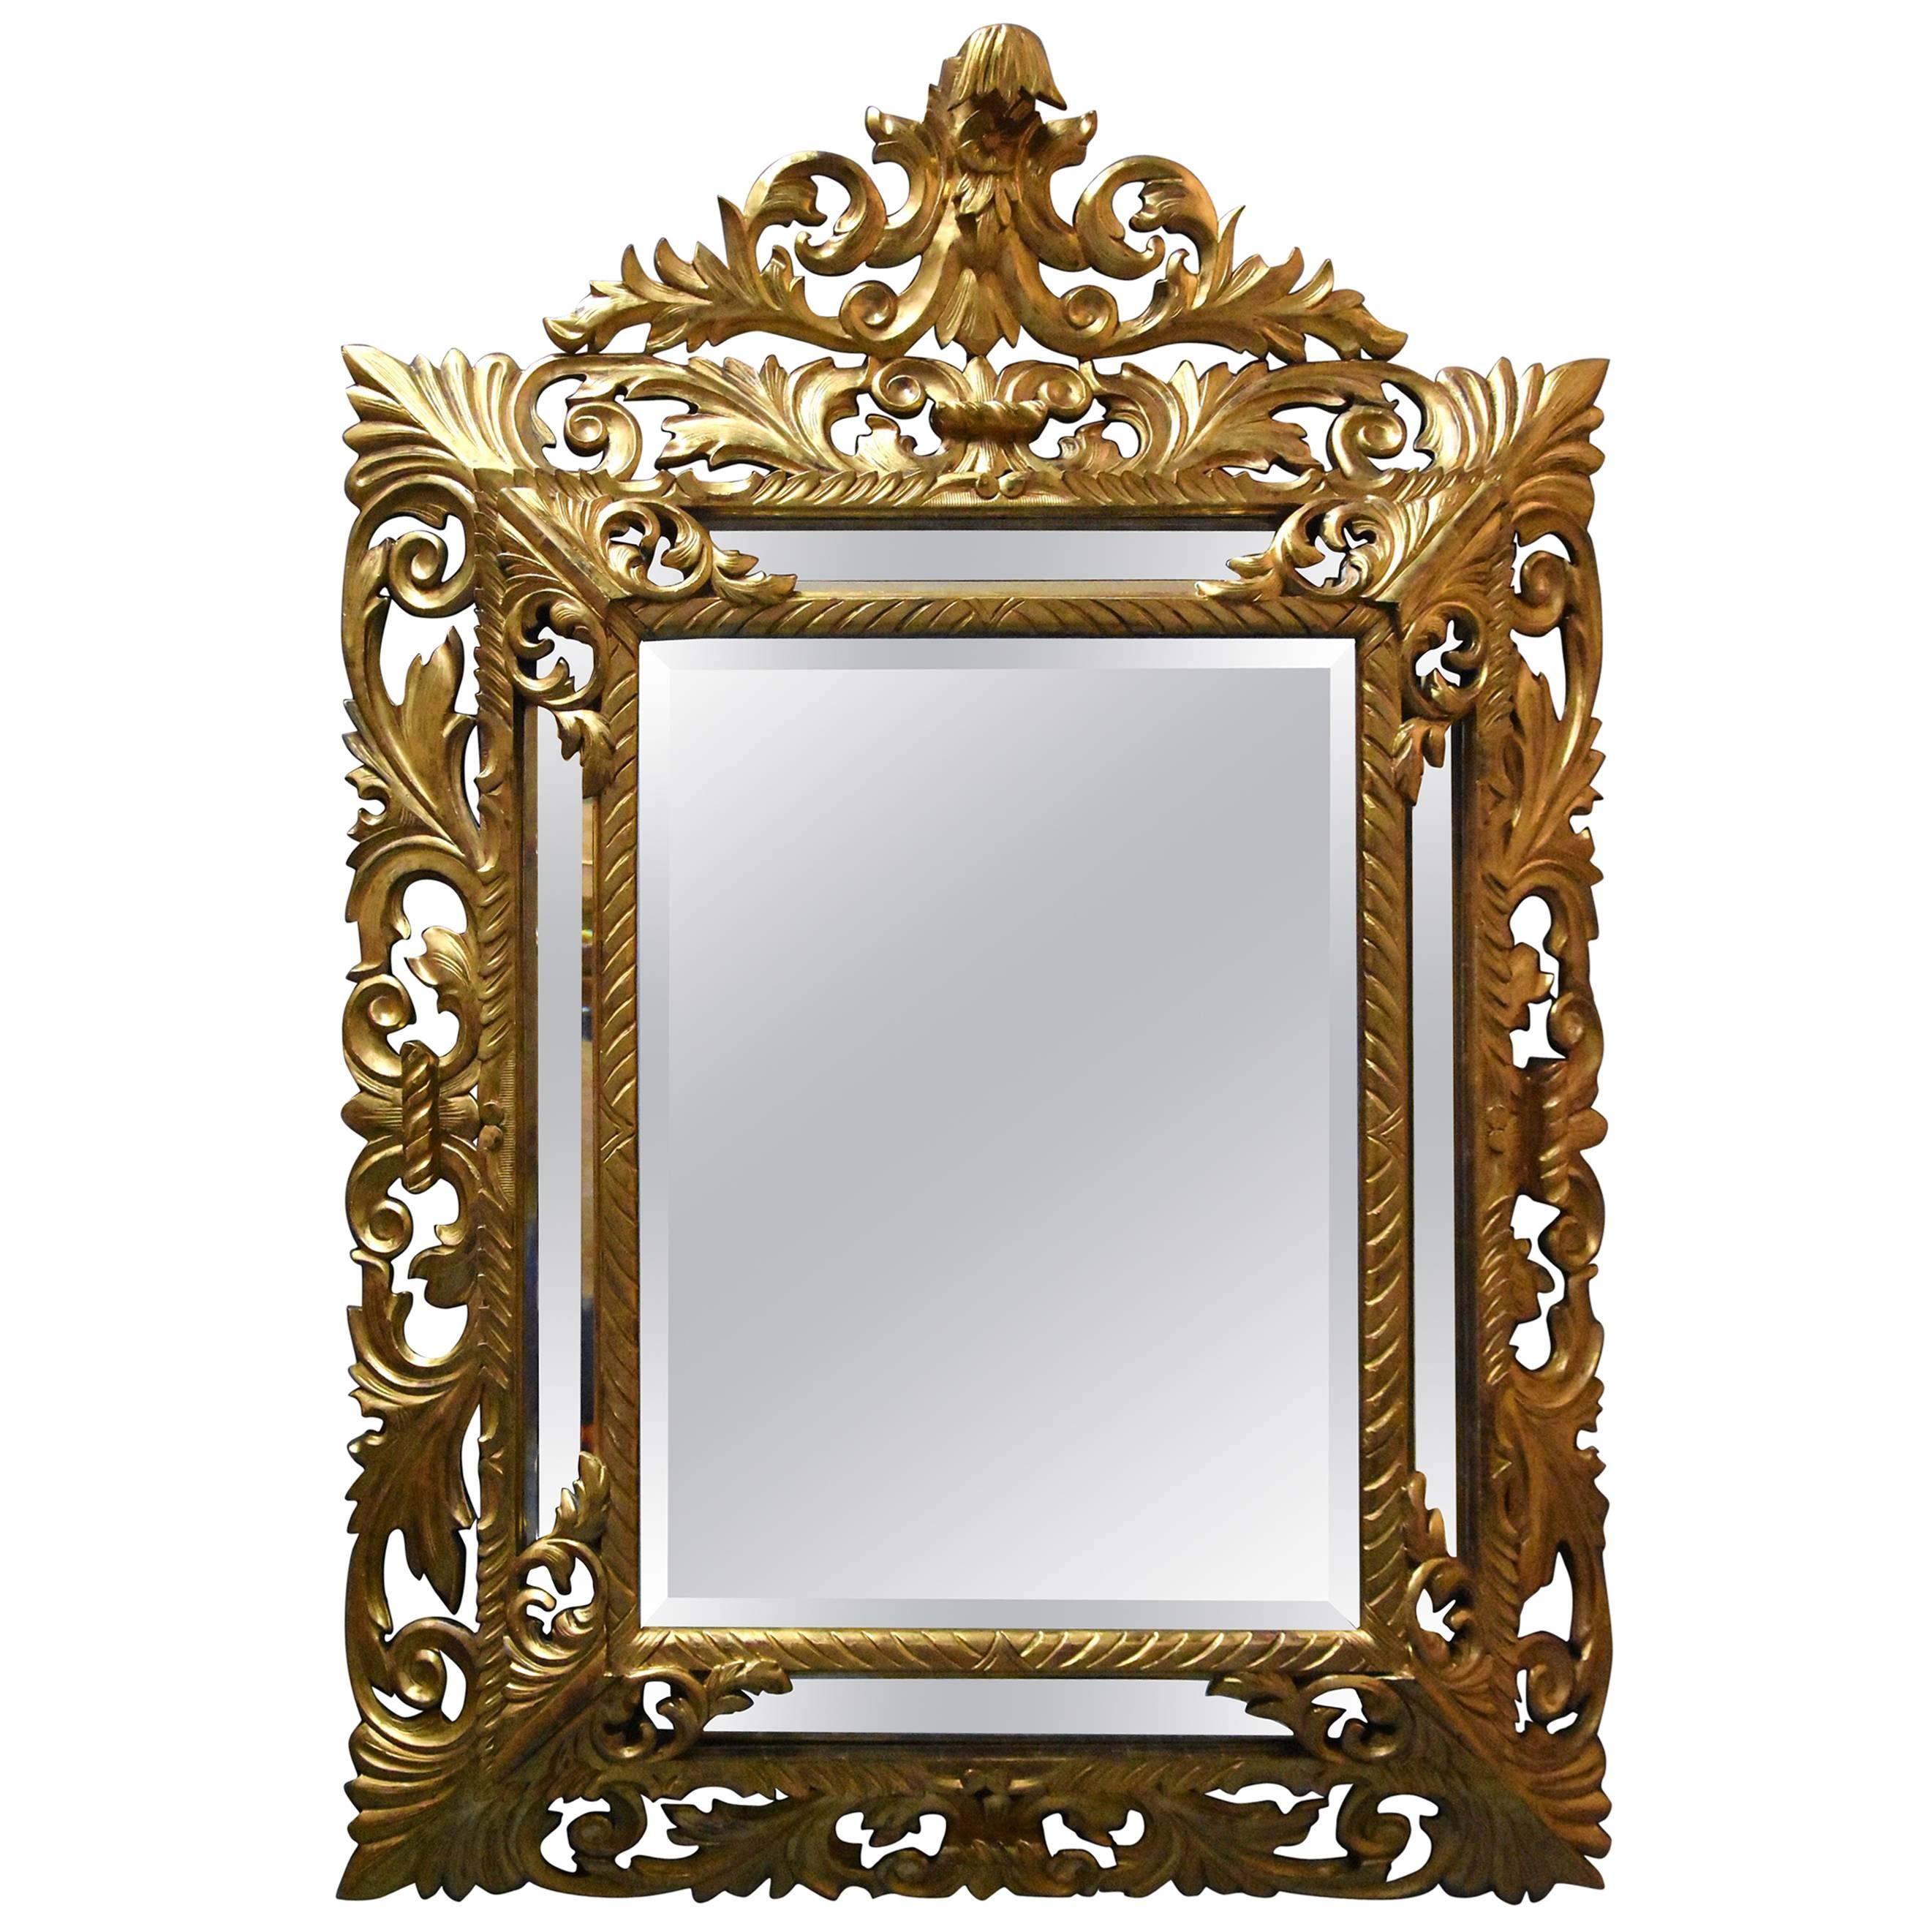 Large 19th Century Italian 'Florentine' Superbly Carved Giltwood Cushion Mirror For Sale